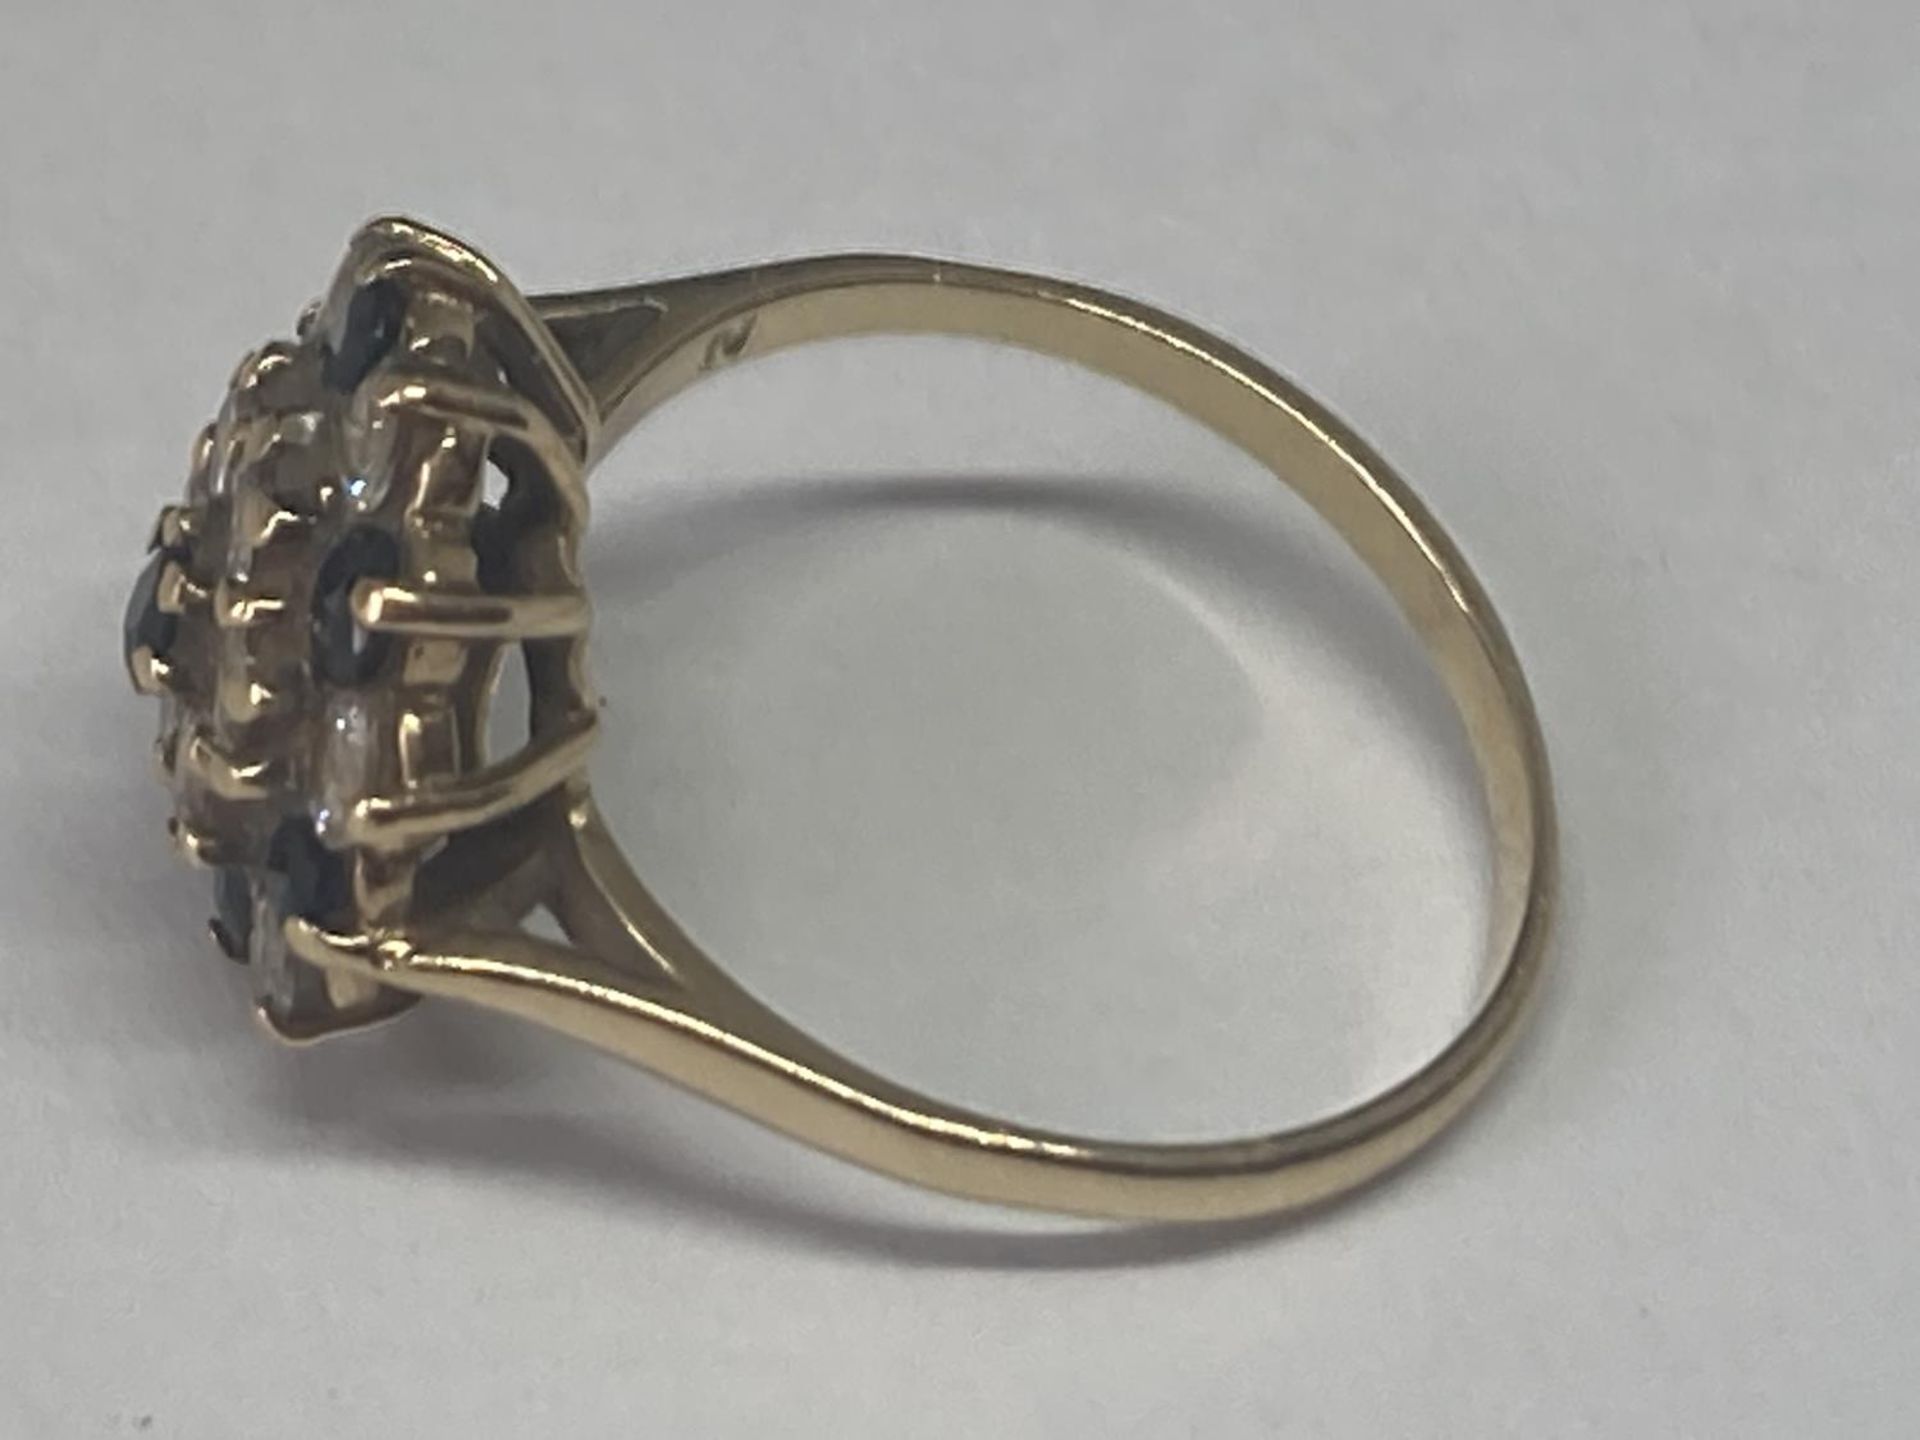 A 9 CARAT GOLD RING WITH SAPPHIRE AND CUBIC ZIRCONIAS IN A CLUSTER DESIGN SIZE M/N - Image 4 of 6